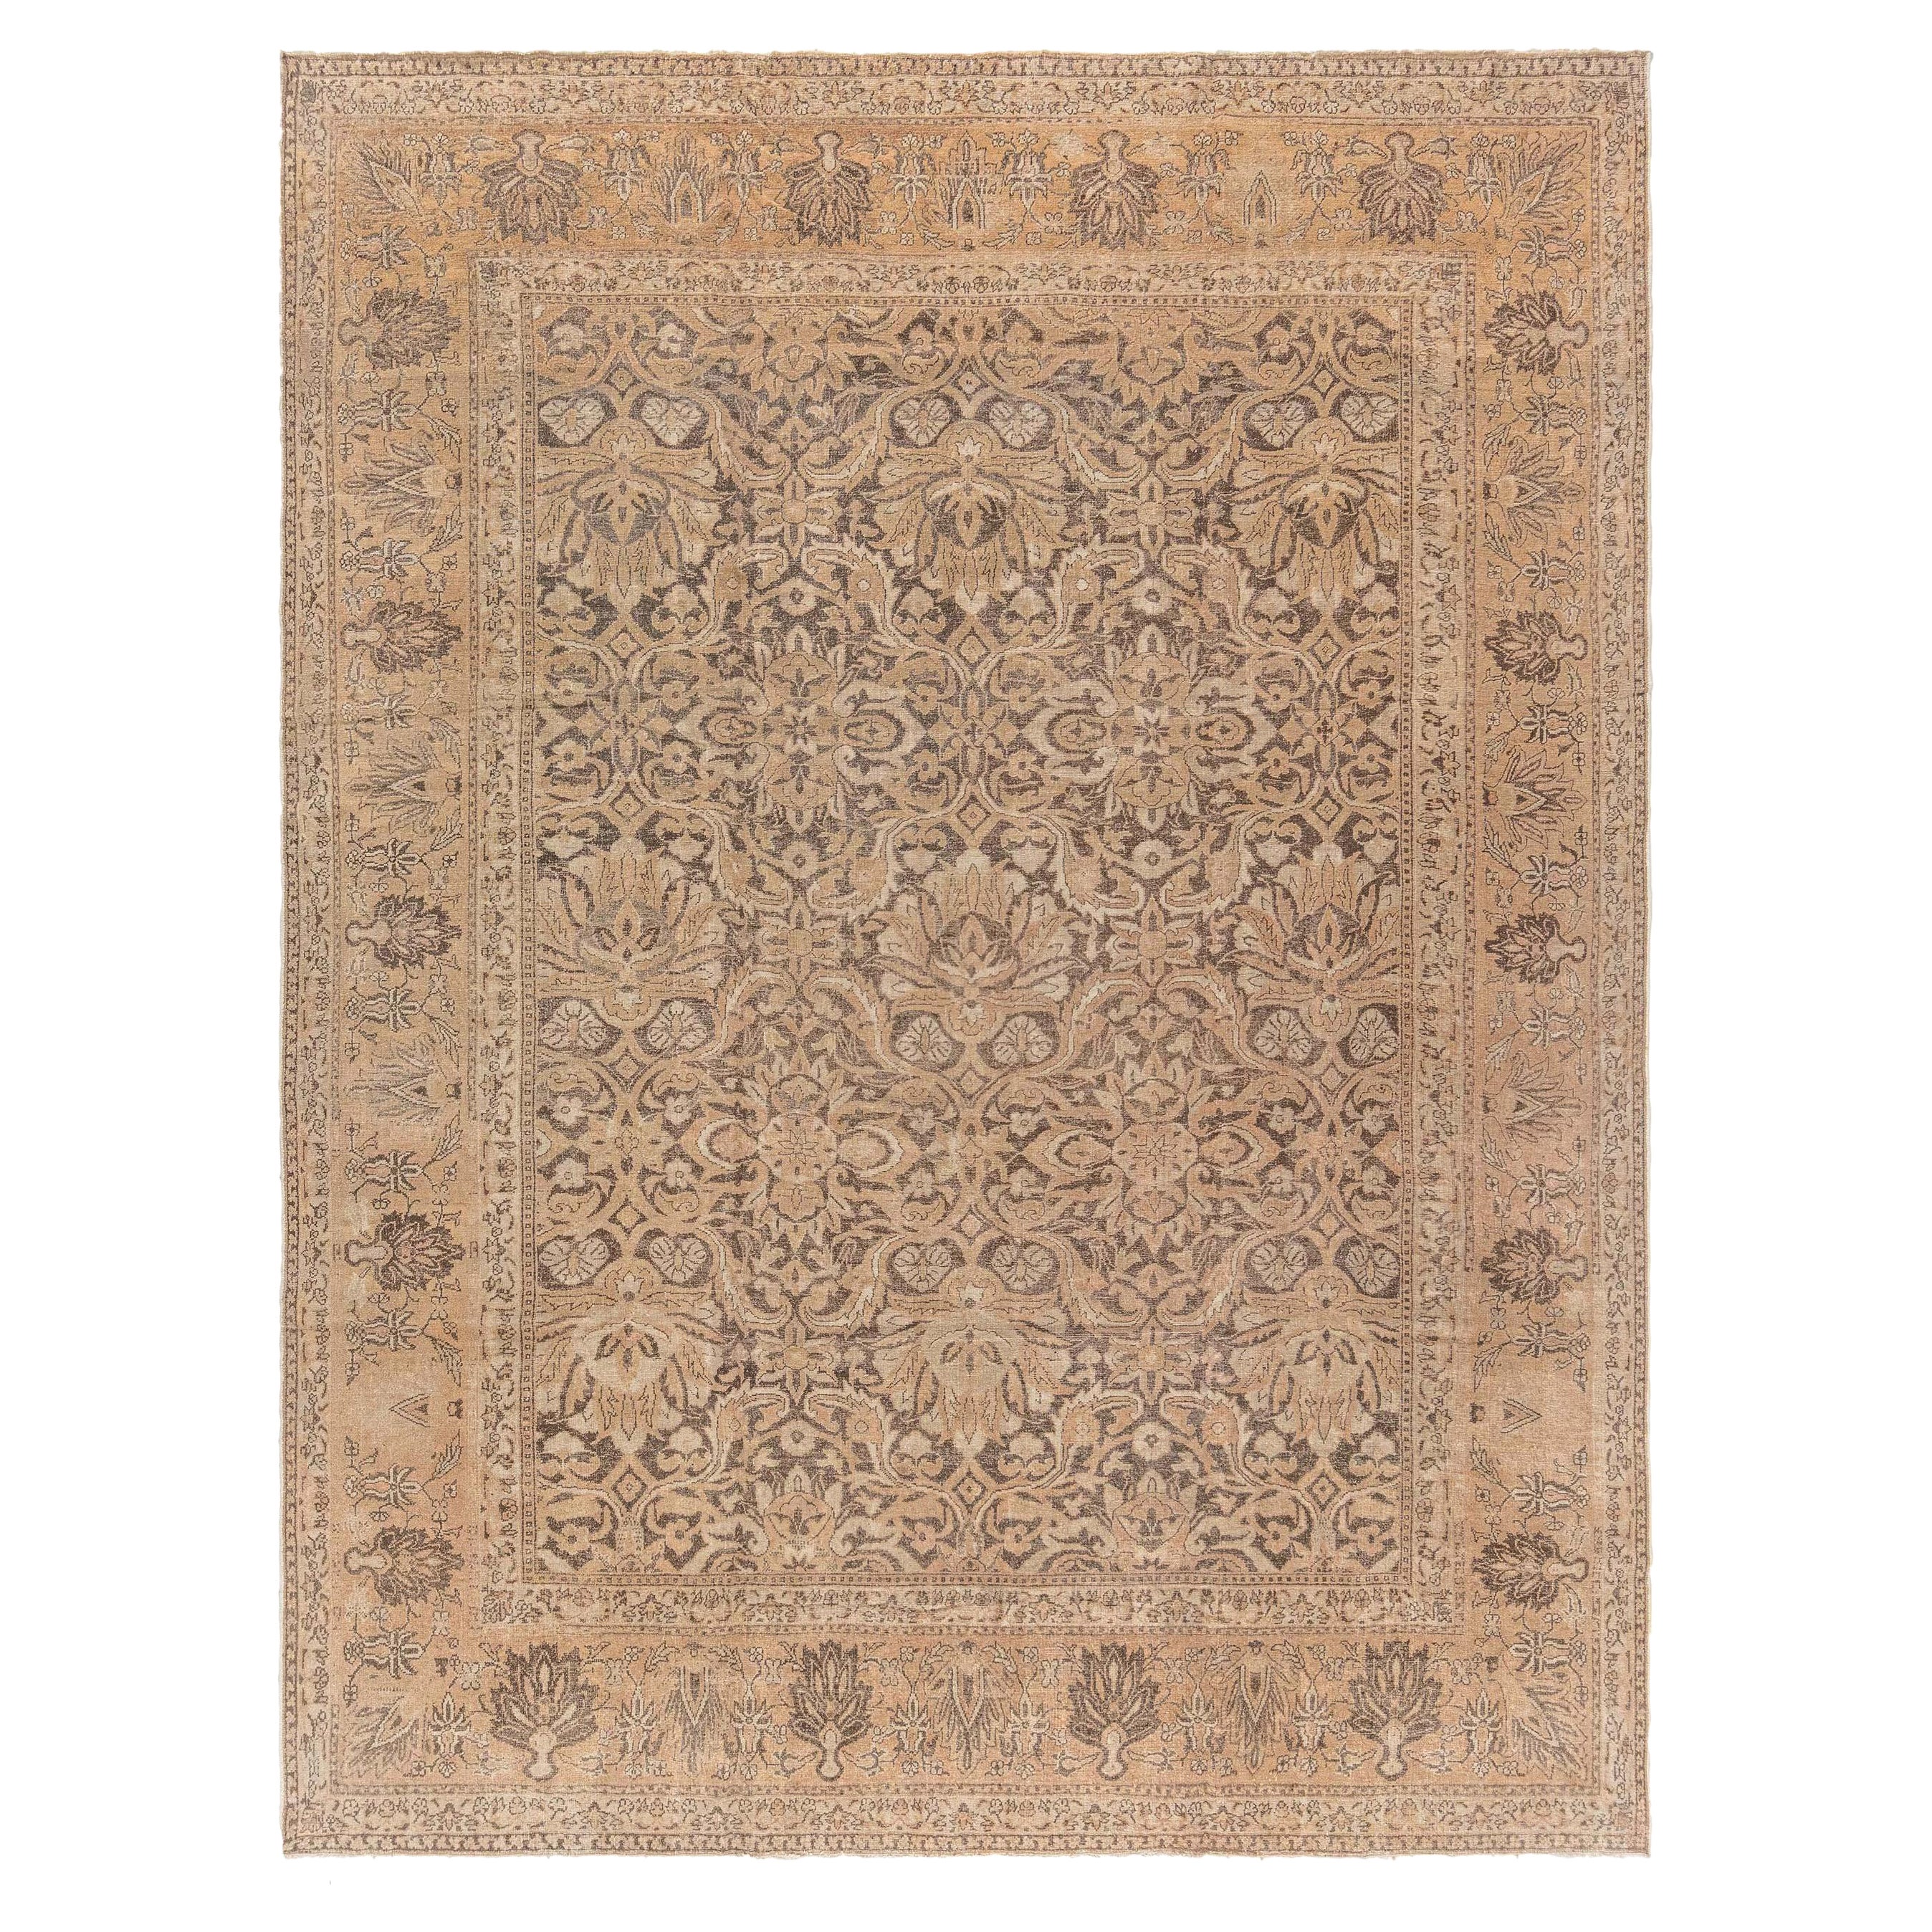 Authentic Indian Amritsar Handmade Wool Rug For Sale